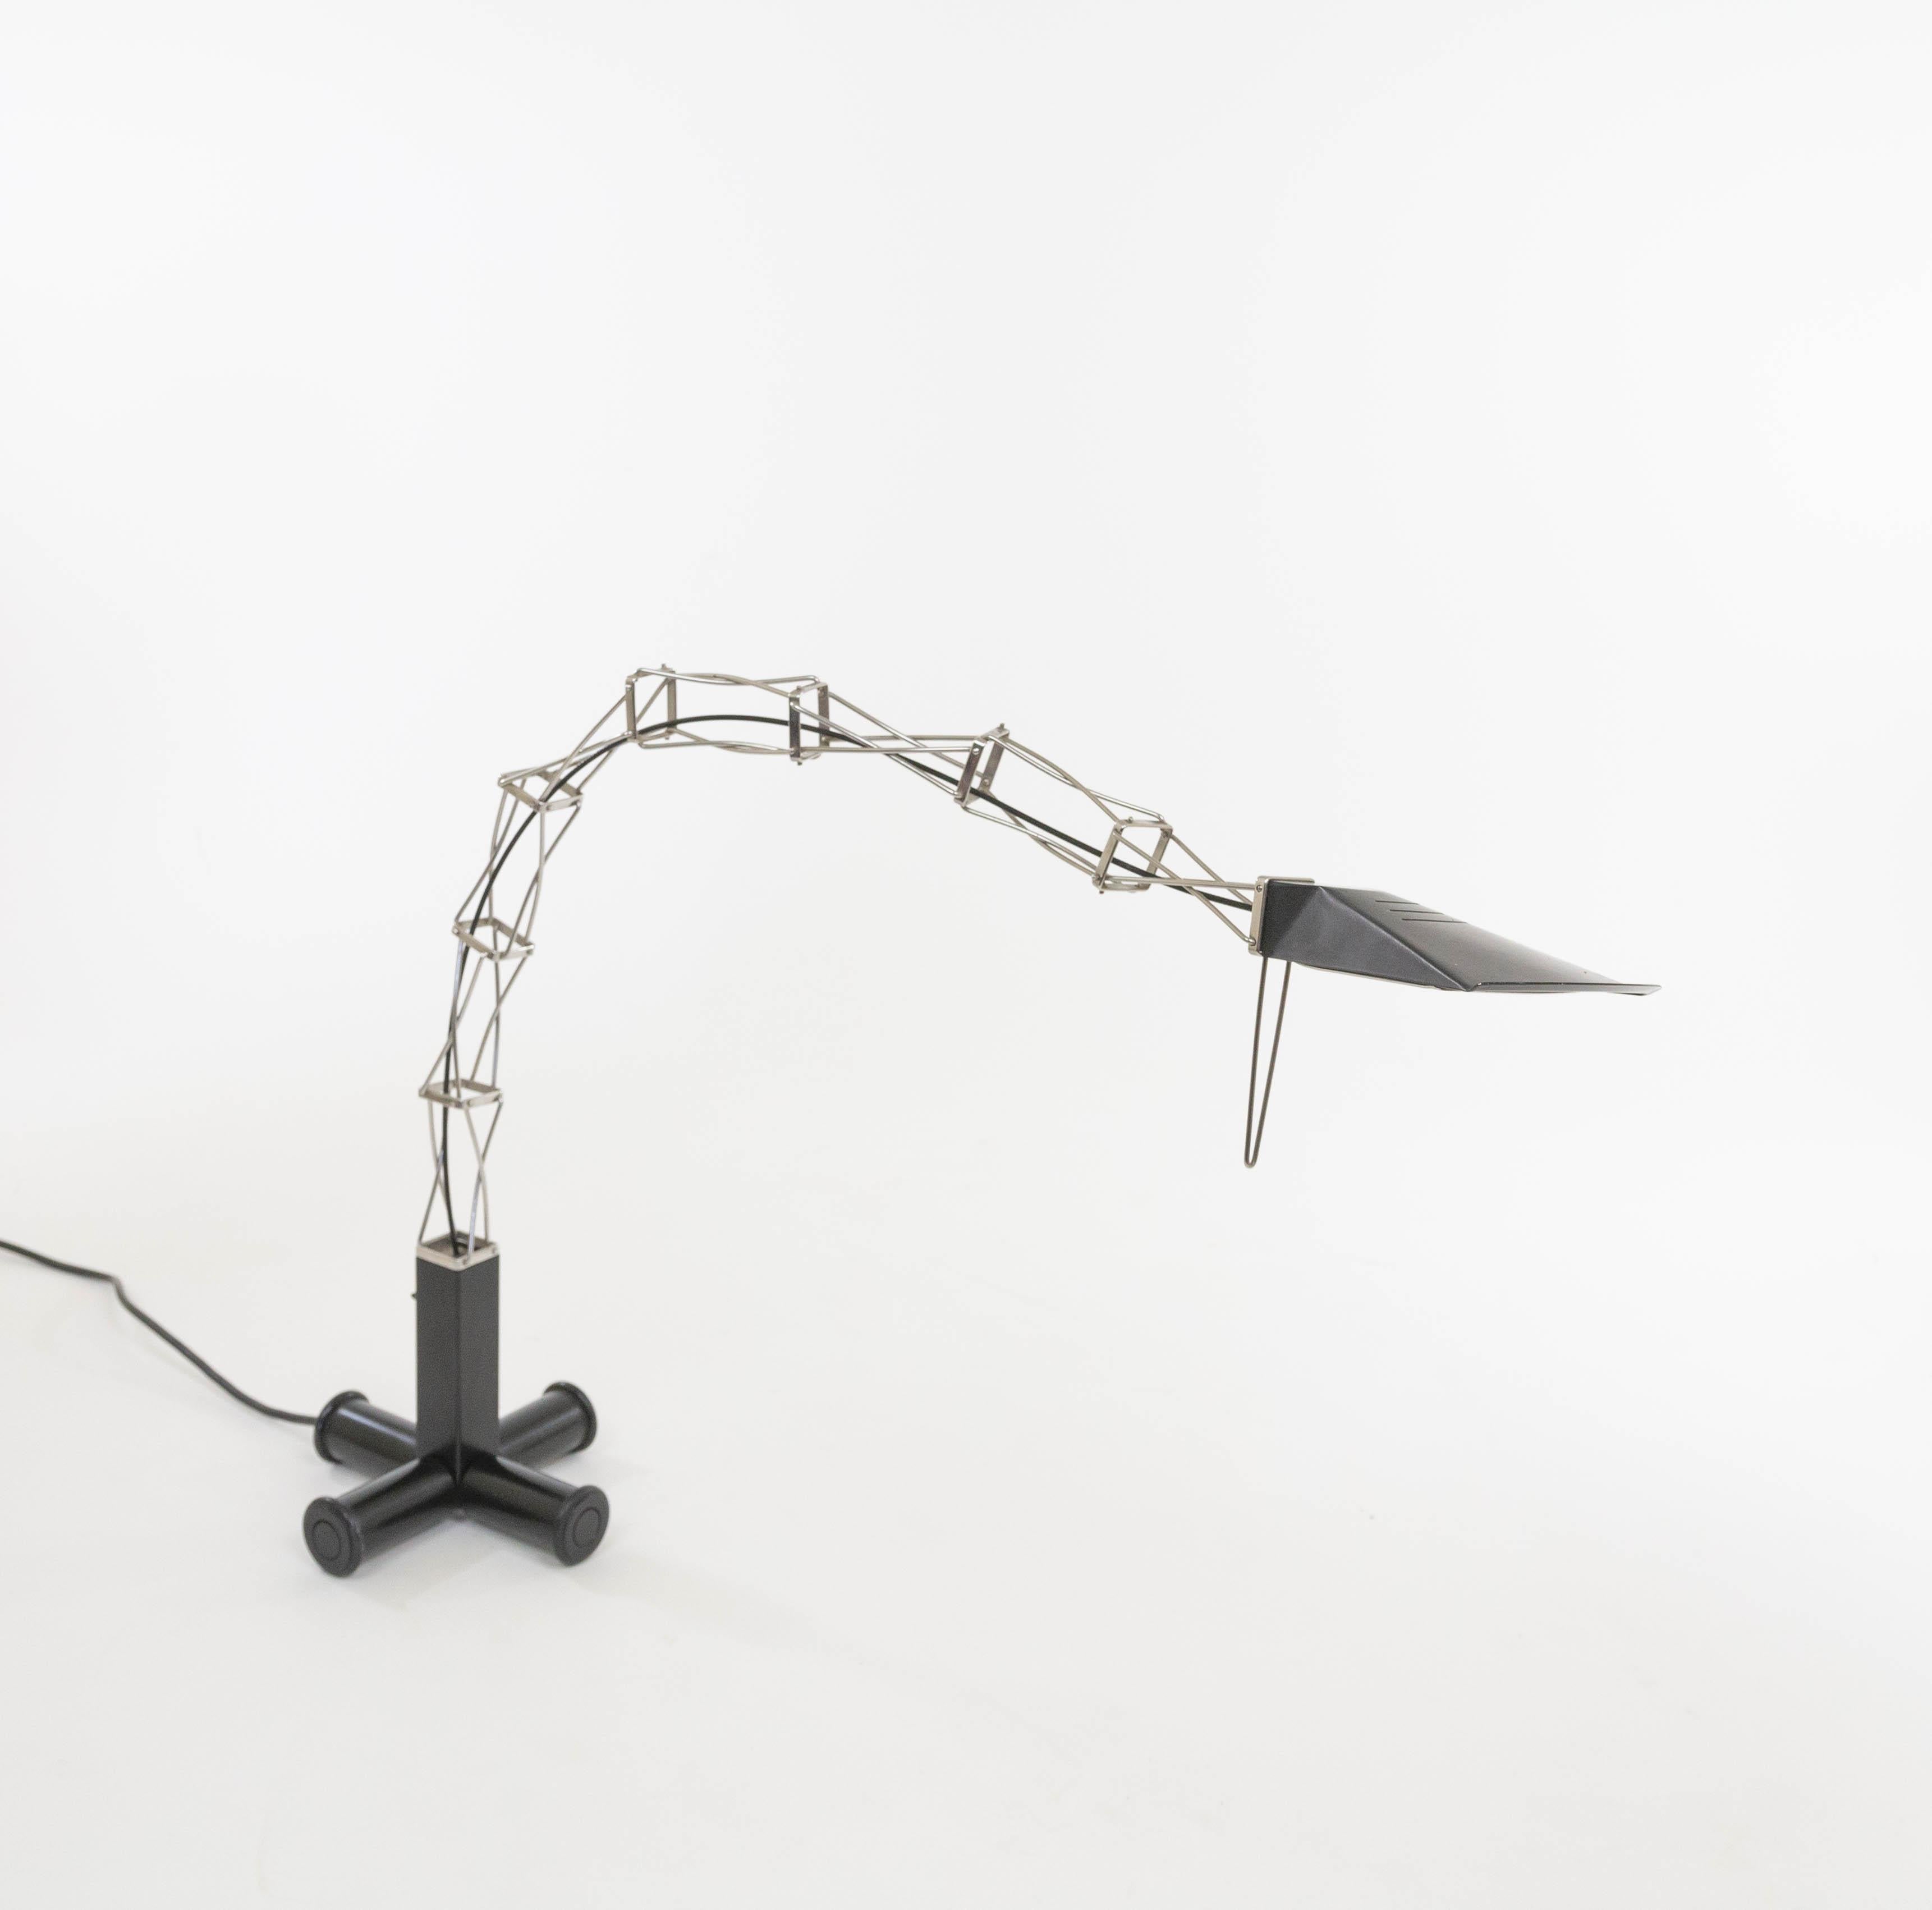 Multix halogen table lamp designed by Yaacov Kaufman for lighting manufacturer Lumina in the 1980s.

The base of the Multix table lamp consists of four round rotating tubes that end in wheels. The base makes it possible to easily turn the lamp in